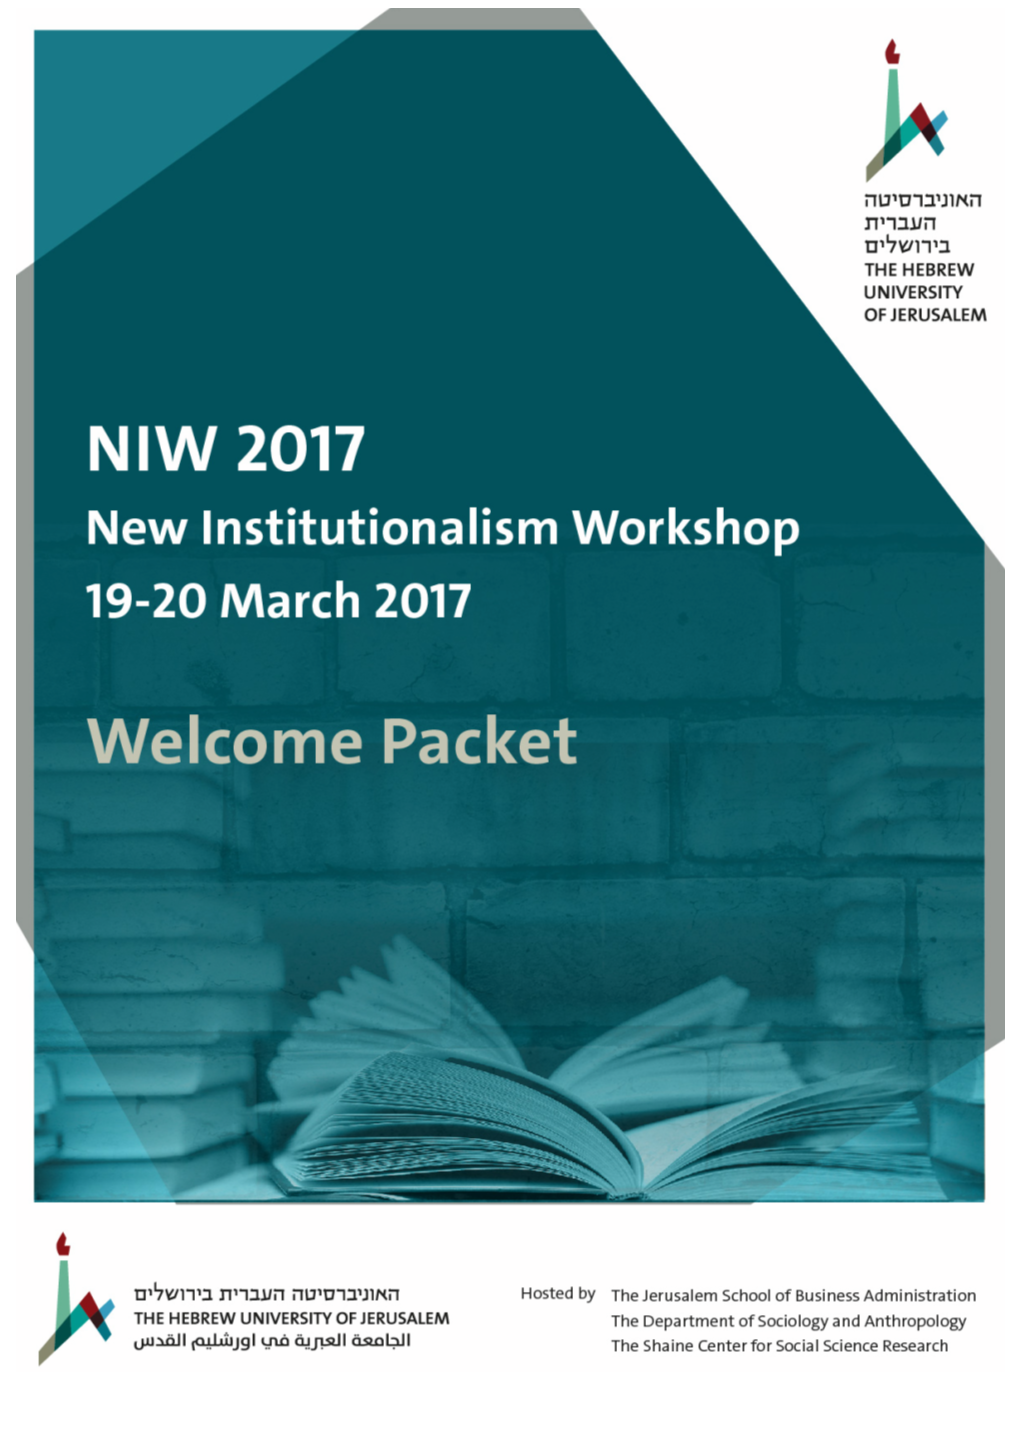 Welcome to New Institutionalism Workshop 2017, Hosted at the Hebrew University of Jerusalem